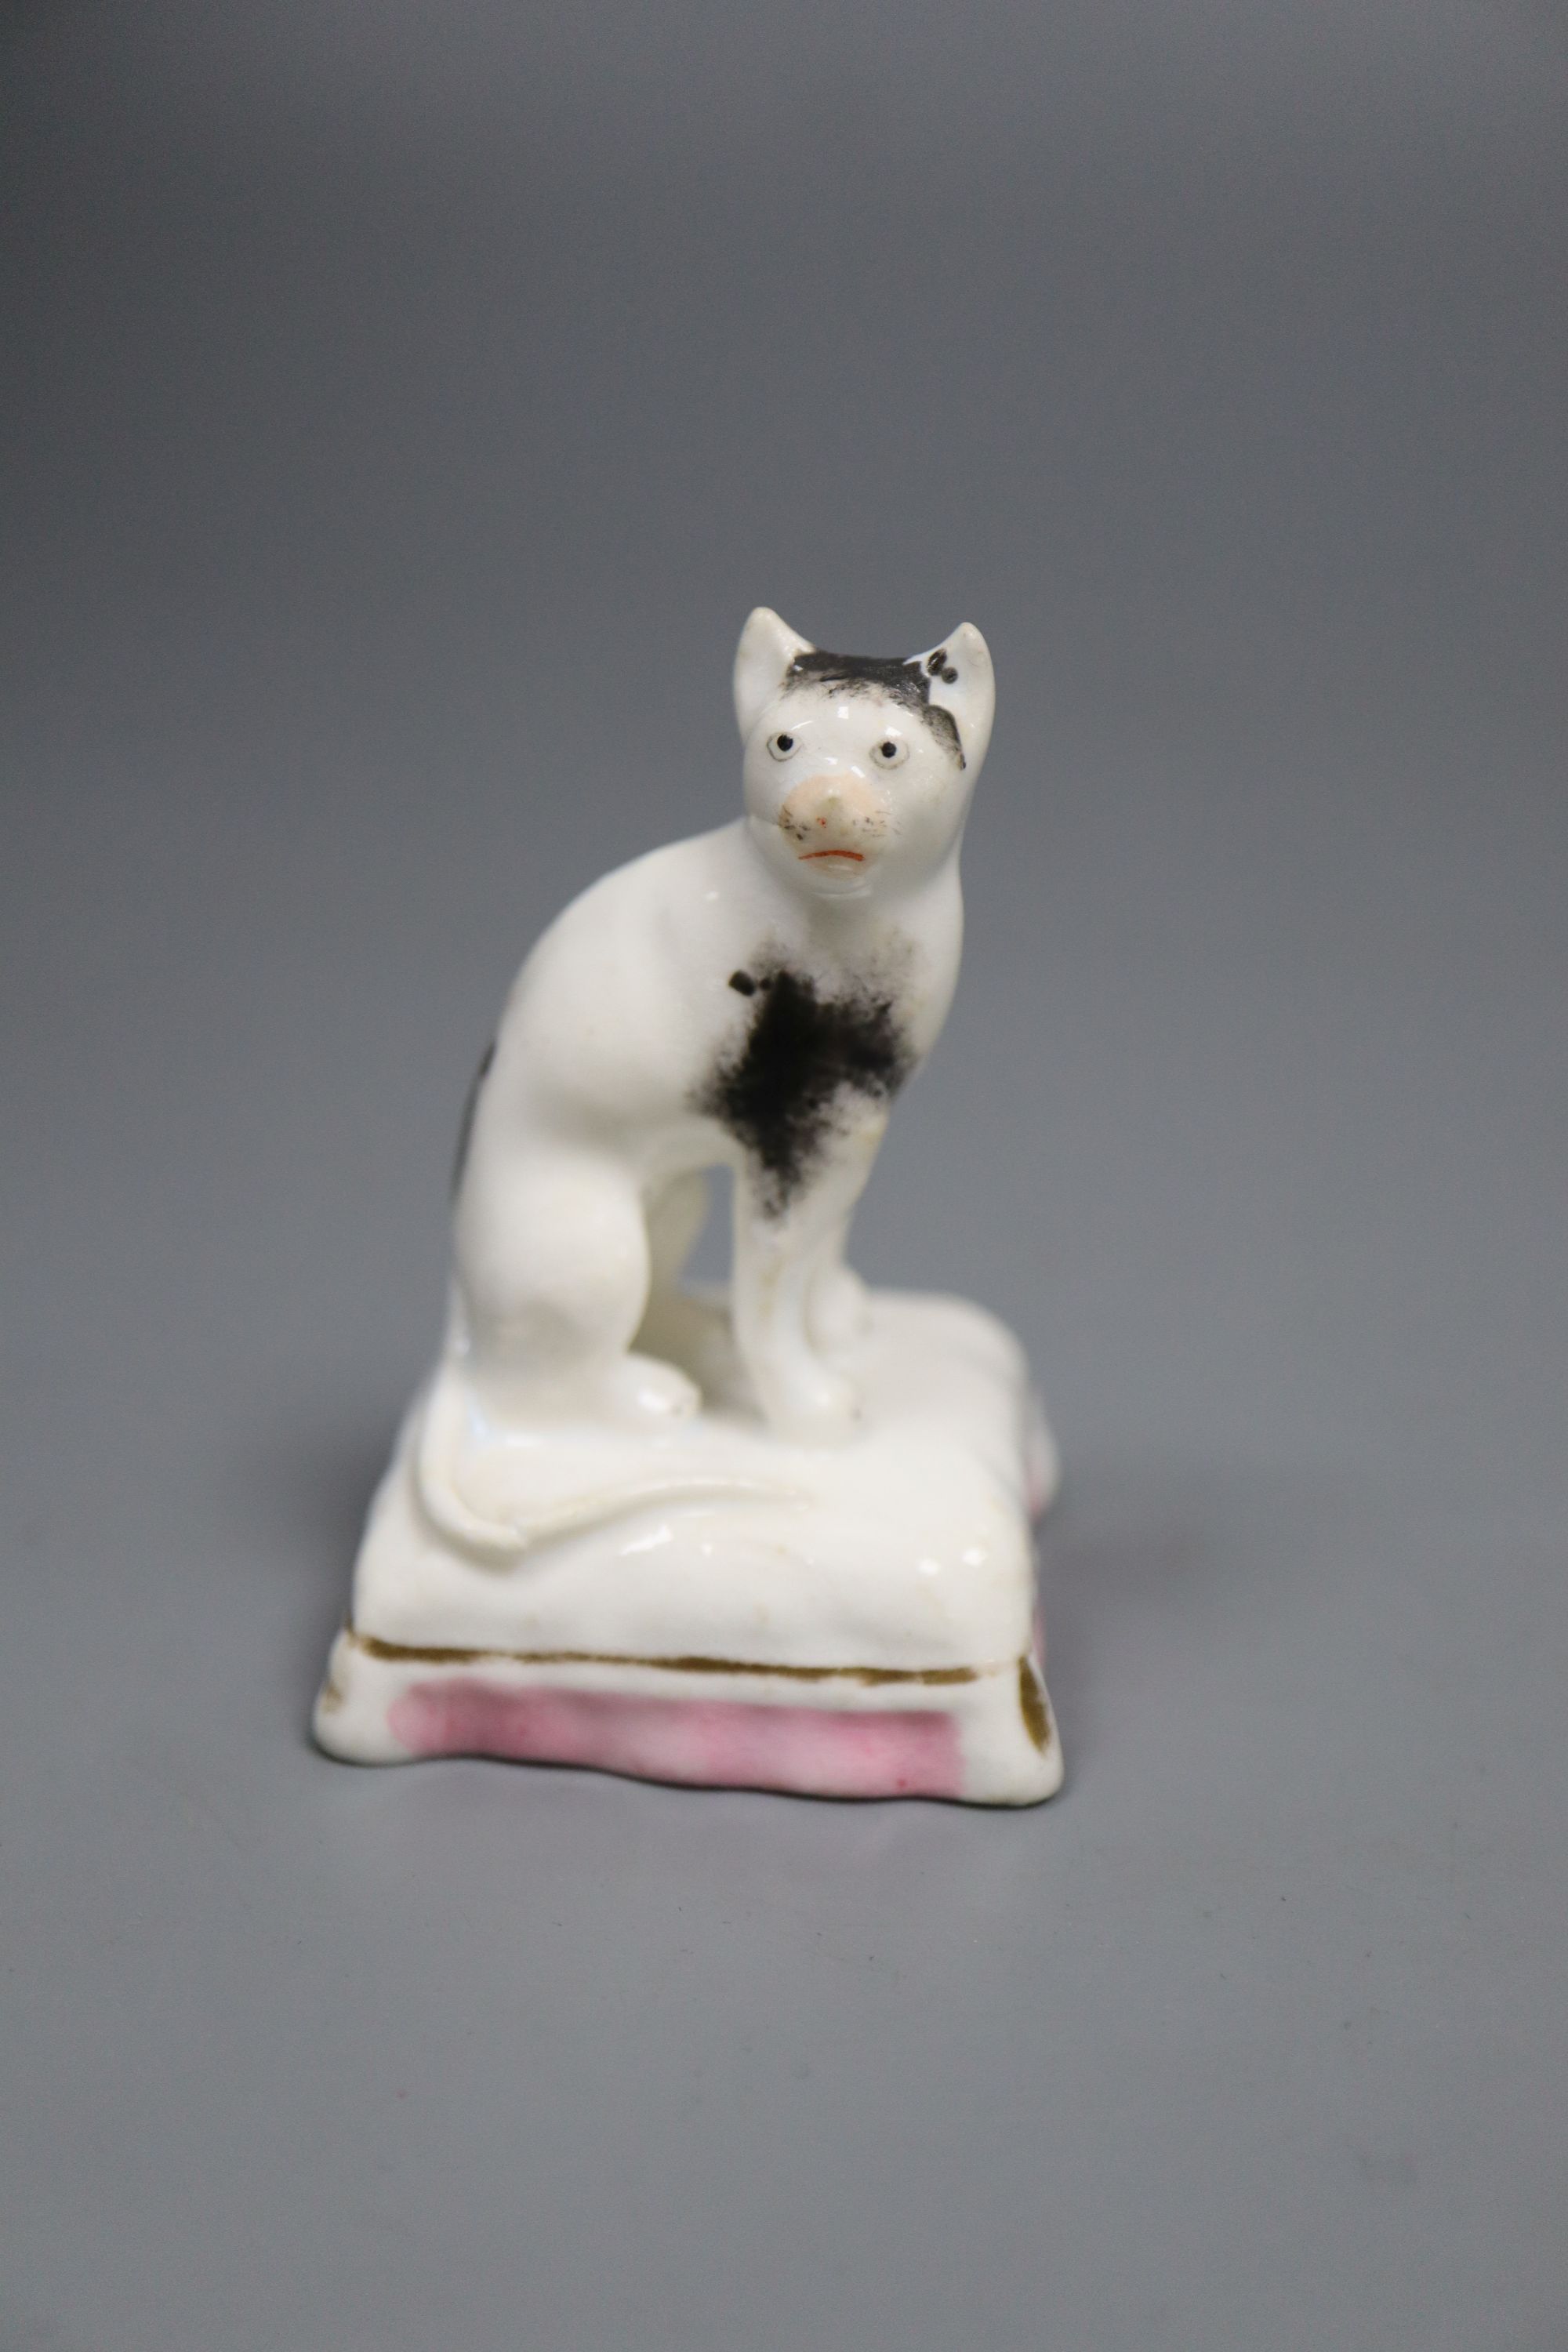 A rare Staffordshire porcelain figure of a cat seated on a cushion, c.1835-50, 6cm